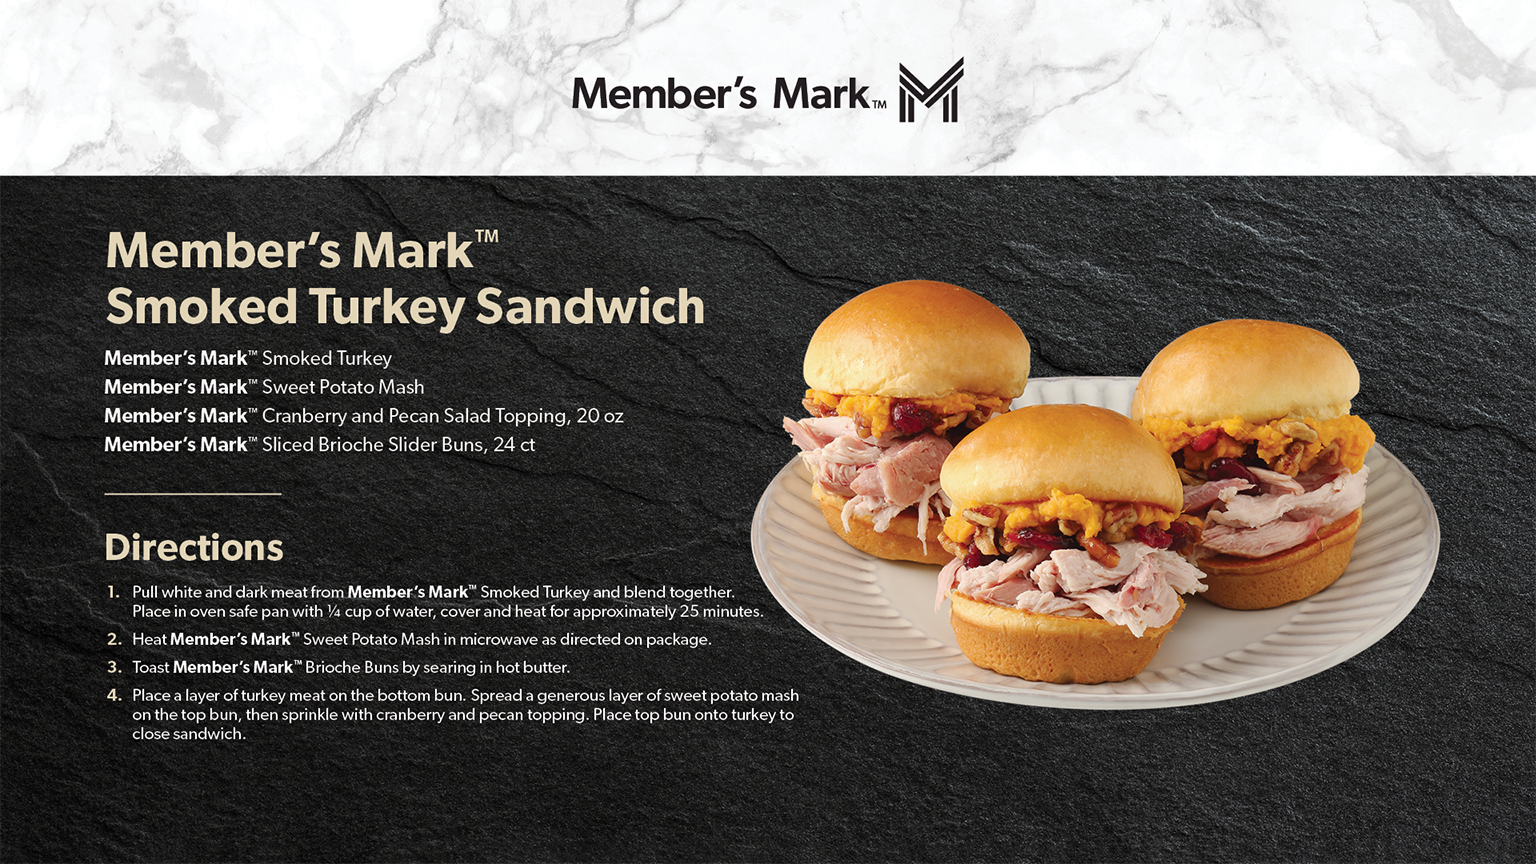 Ingredients and recipe for Member’s Mark Smoked Turkey Sandwich.